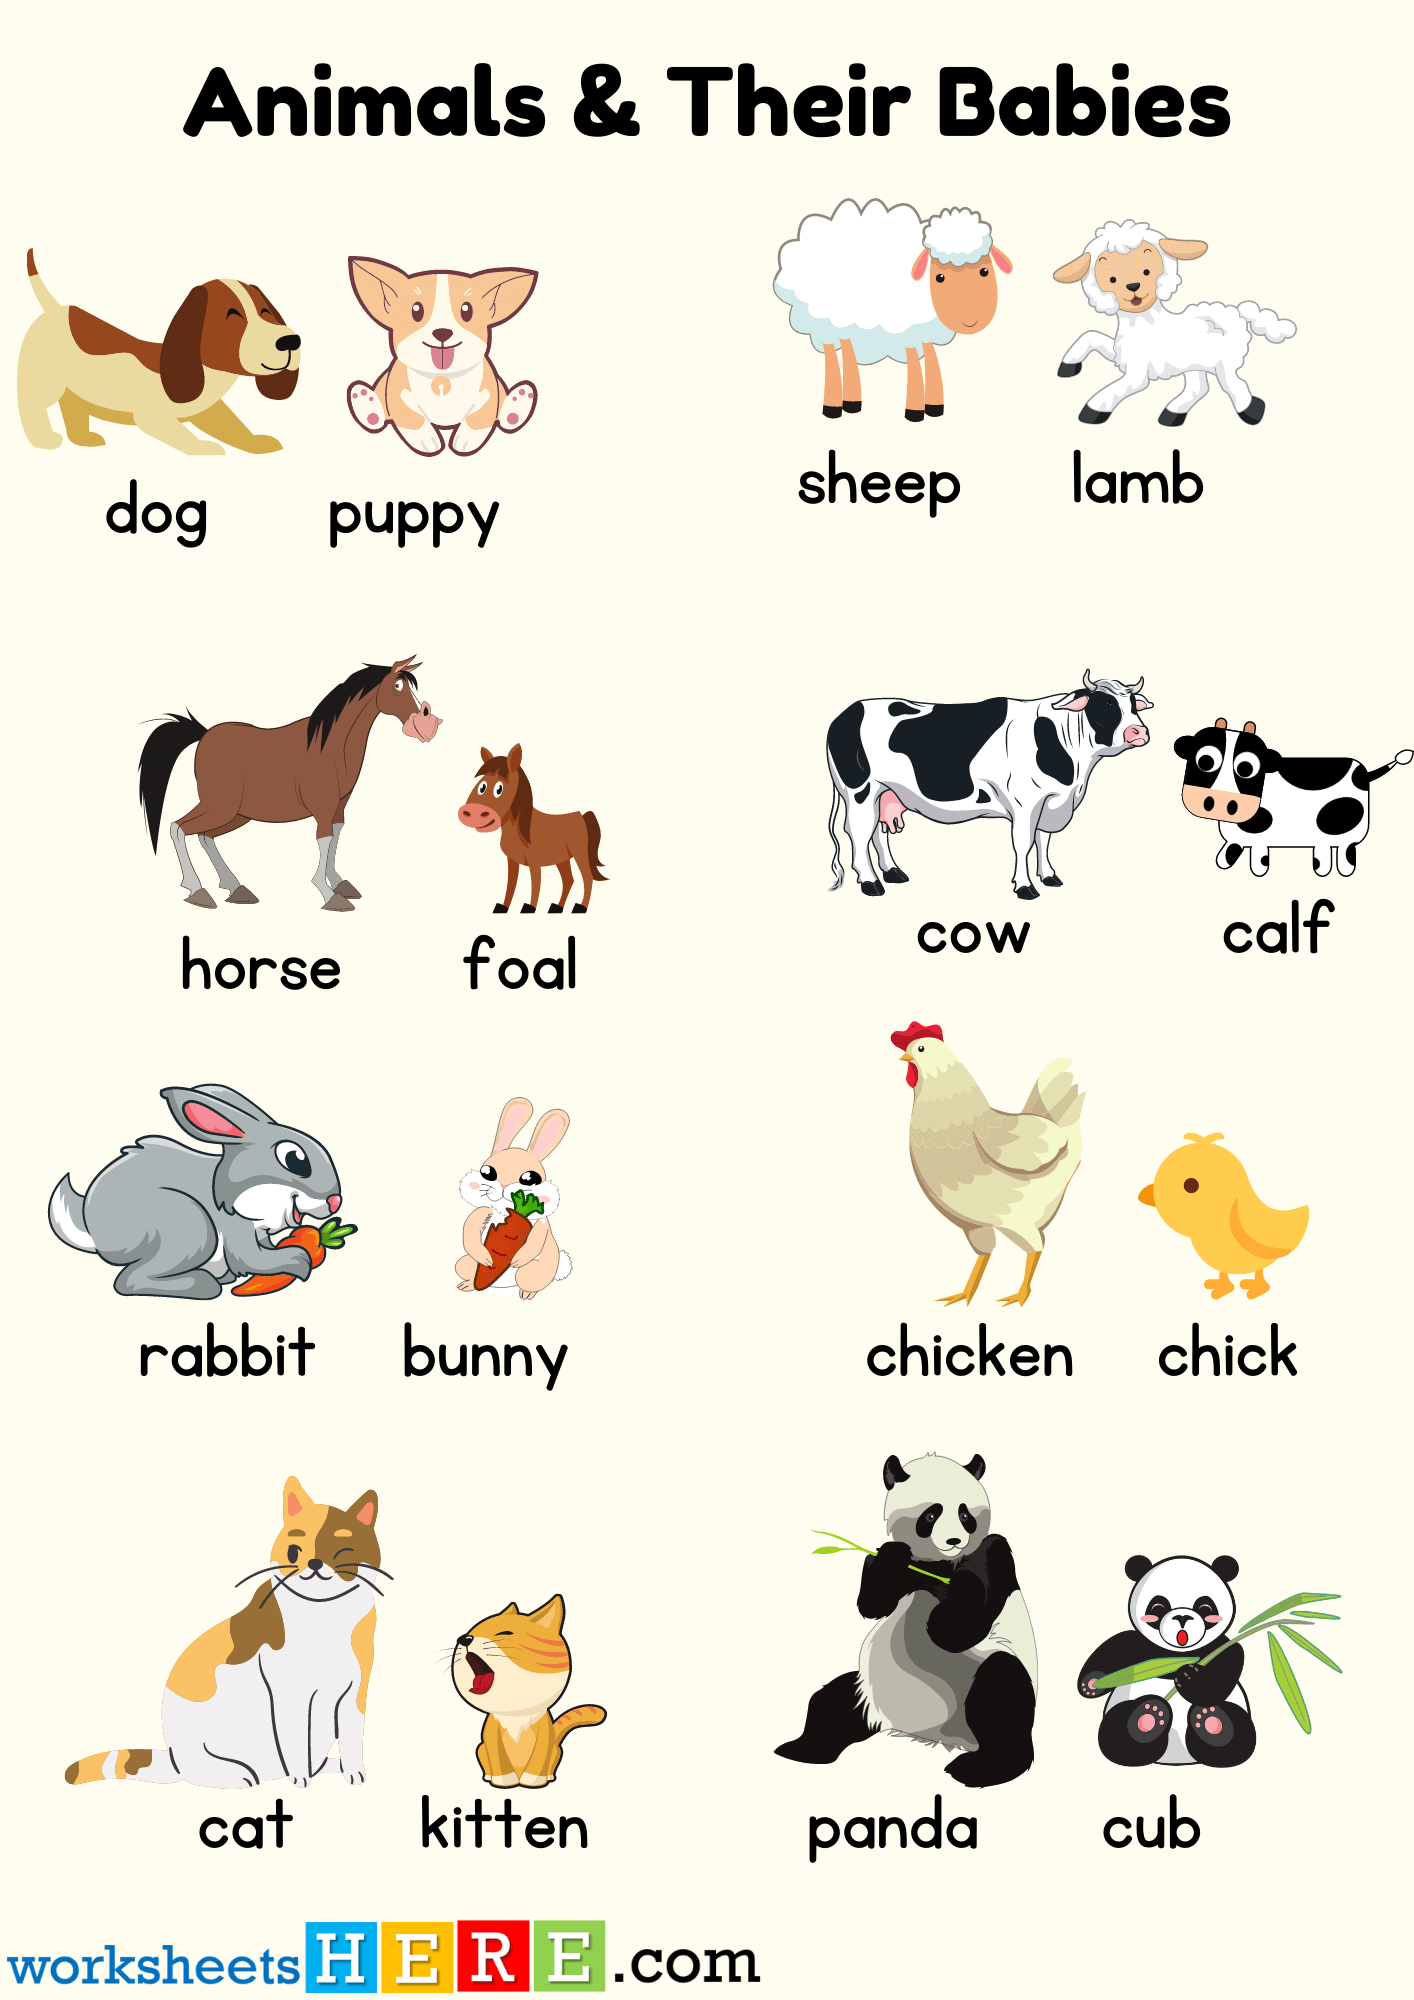 Animals and Their Babies Names with Pictures PDF Worksheet For Students